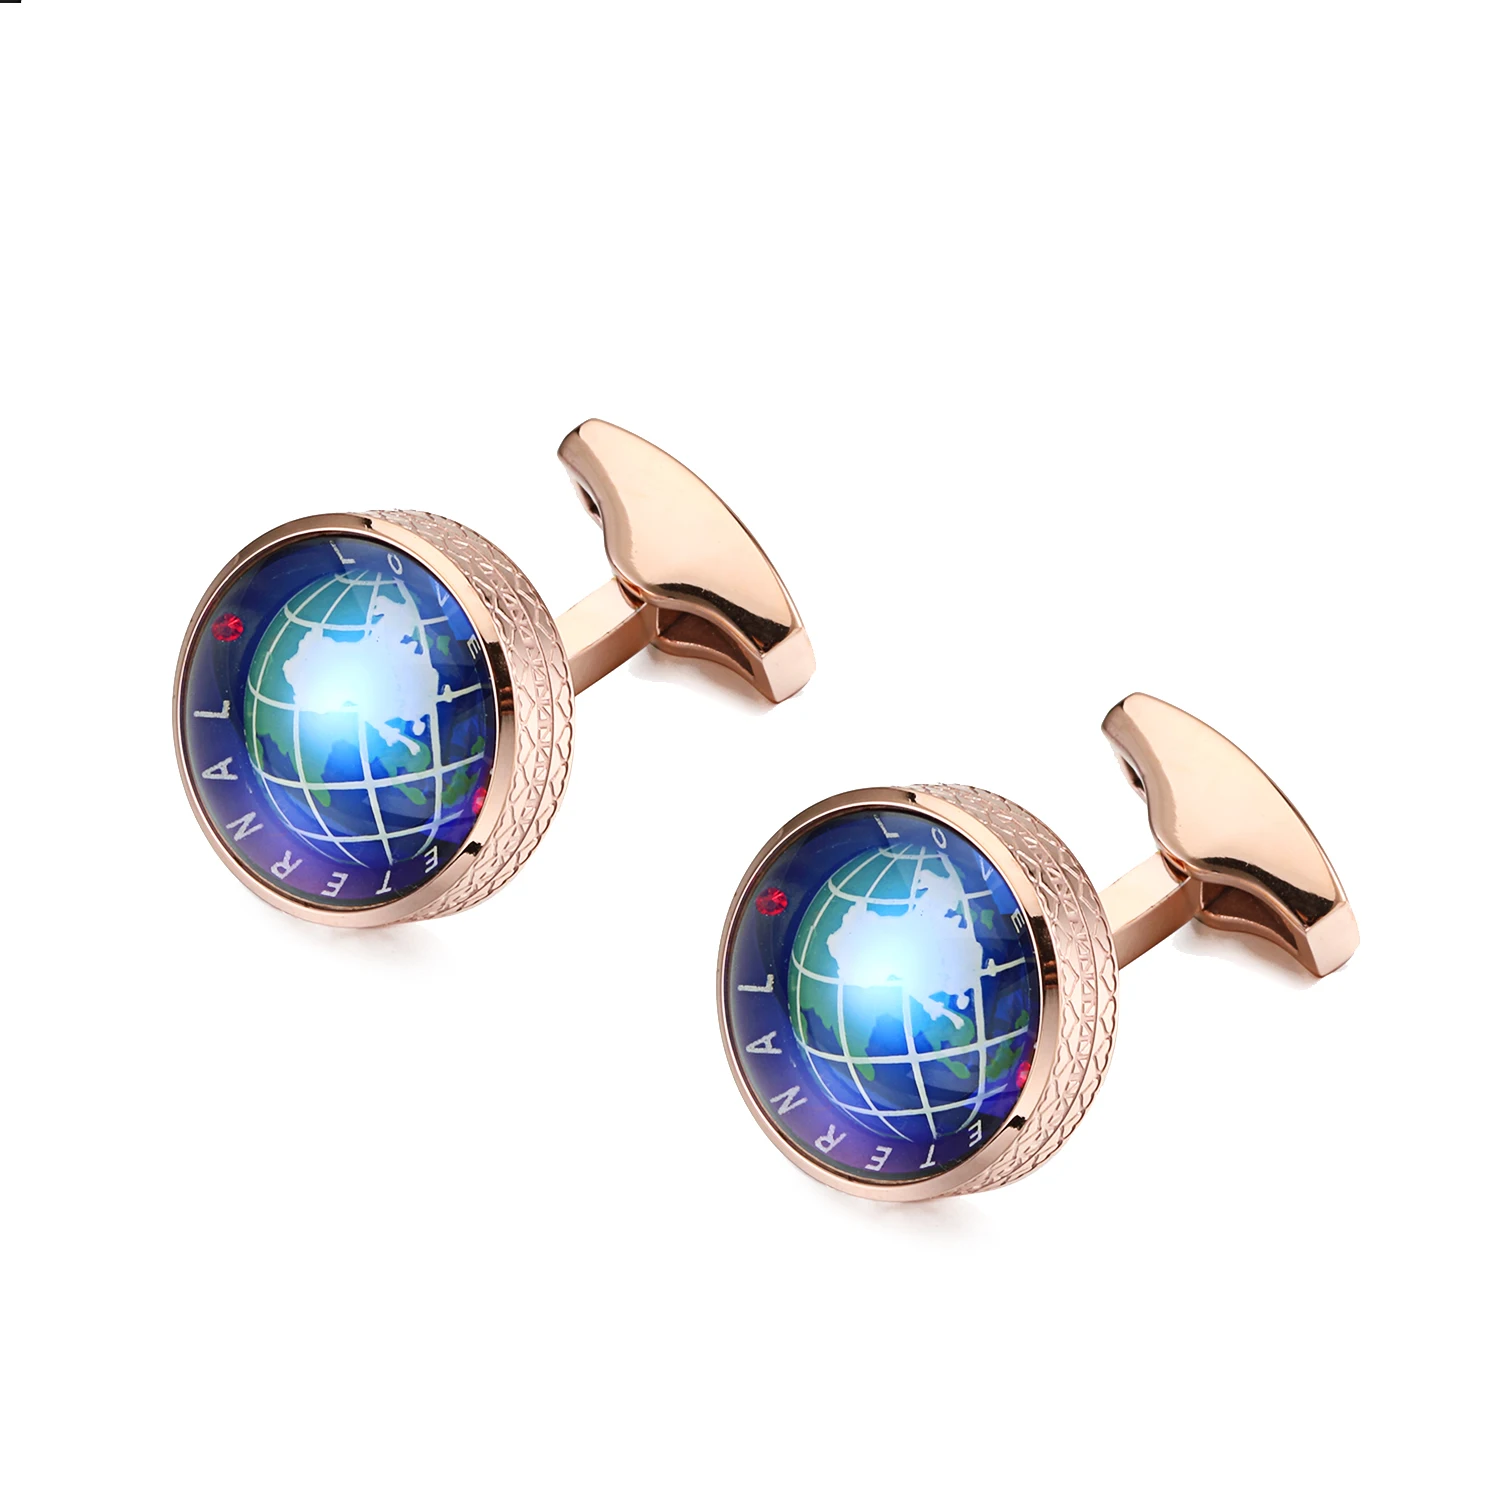 

New Products Earth Cufflinks High Quality Stainless Steel Rose/Blue/Silver/Gold Rotate Cuff links For Men's, Silver/gold/rose gold/blue